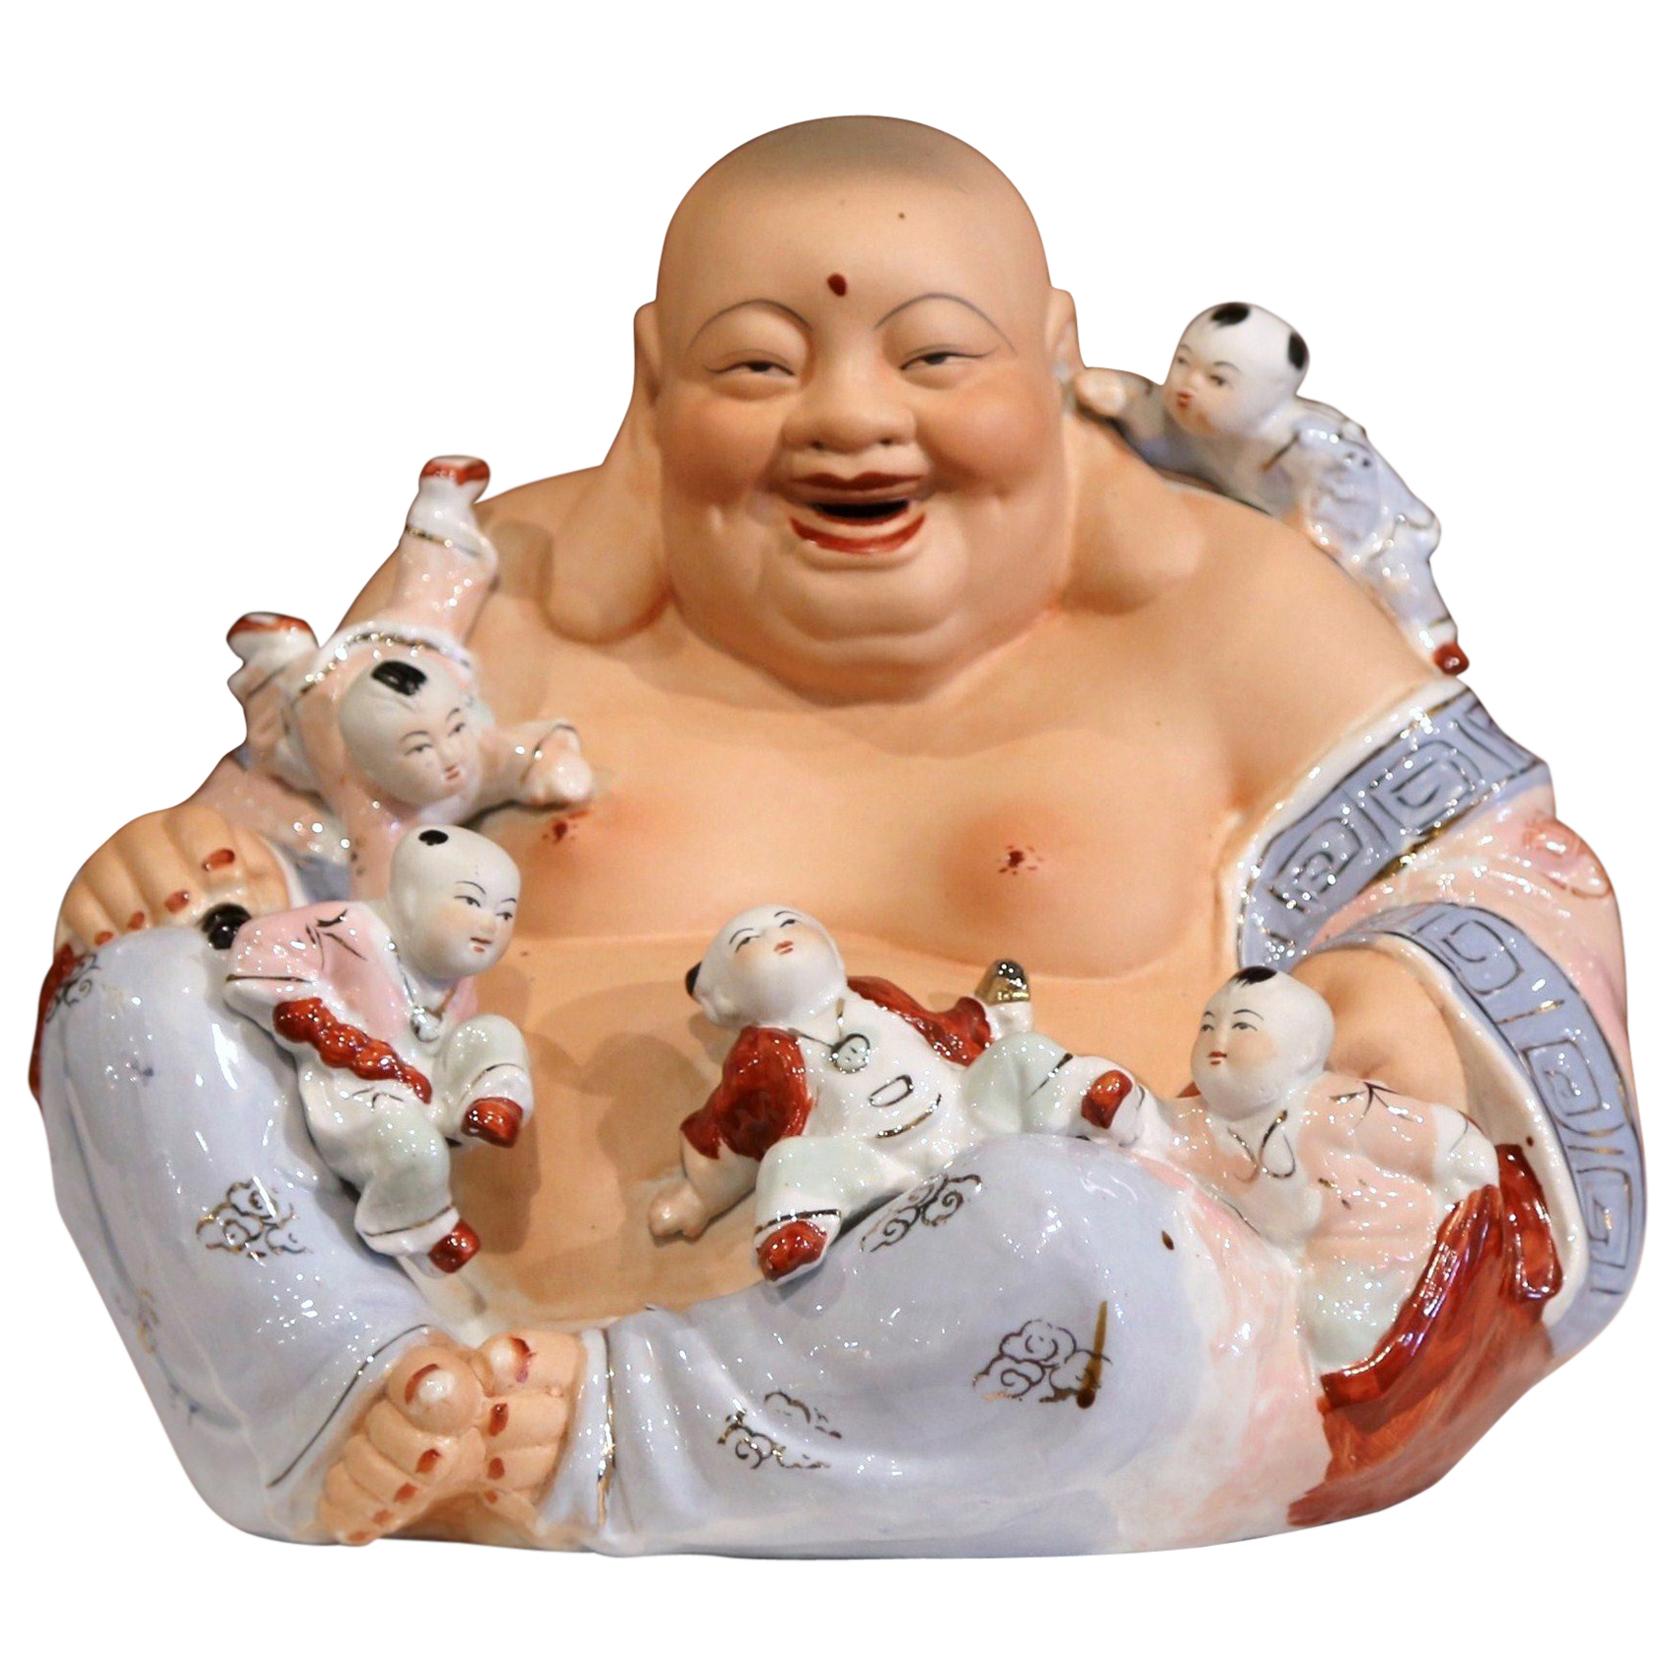 Early 20th Century Vietnamese Hand-Painted Porcelain "Happy Buddha" Sculpture